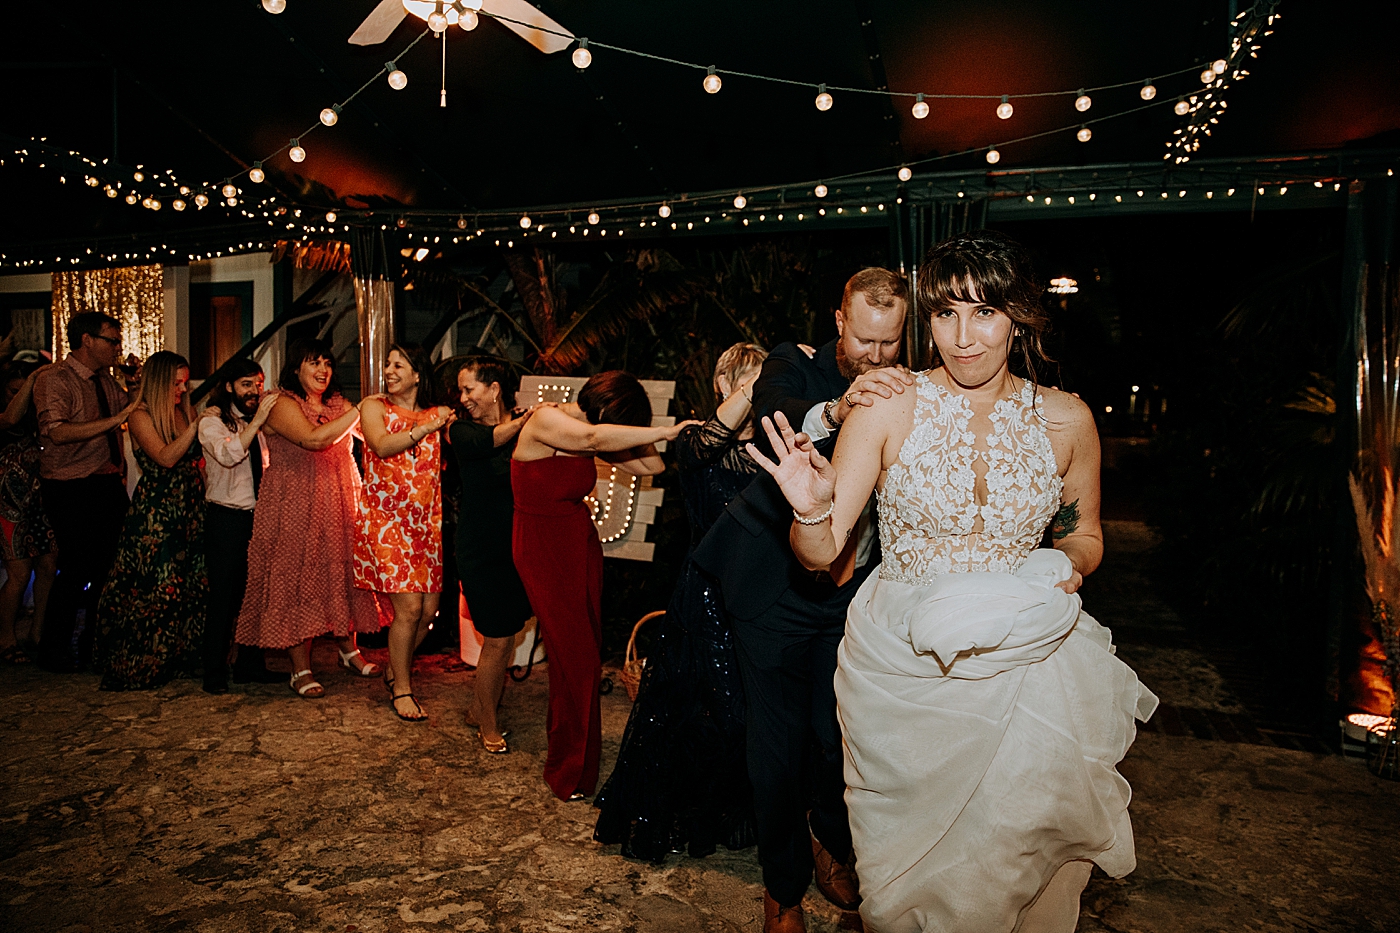 Conga line at Reception Historic Stranahan House Wedding Photography captured by South Florida Wedding Photographer Maggie Alvarez Photography